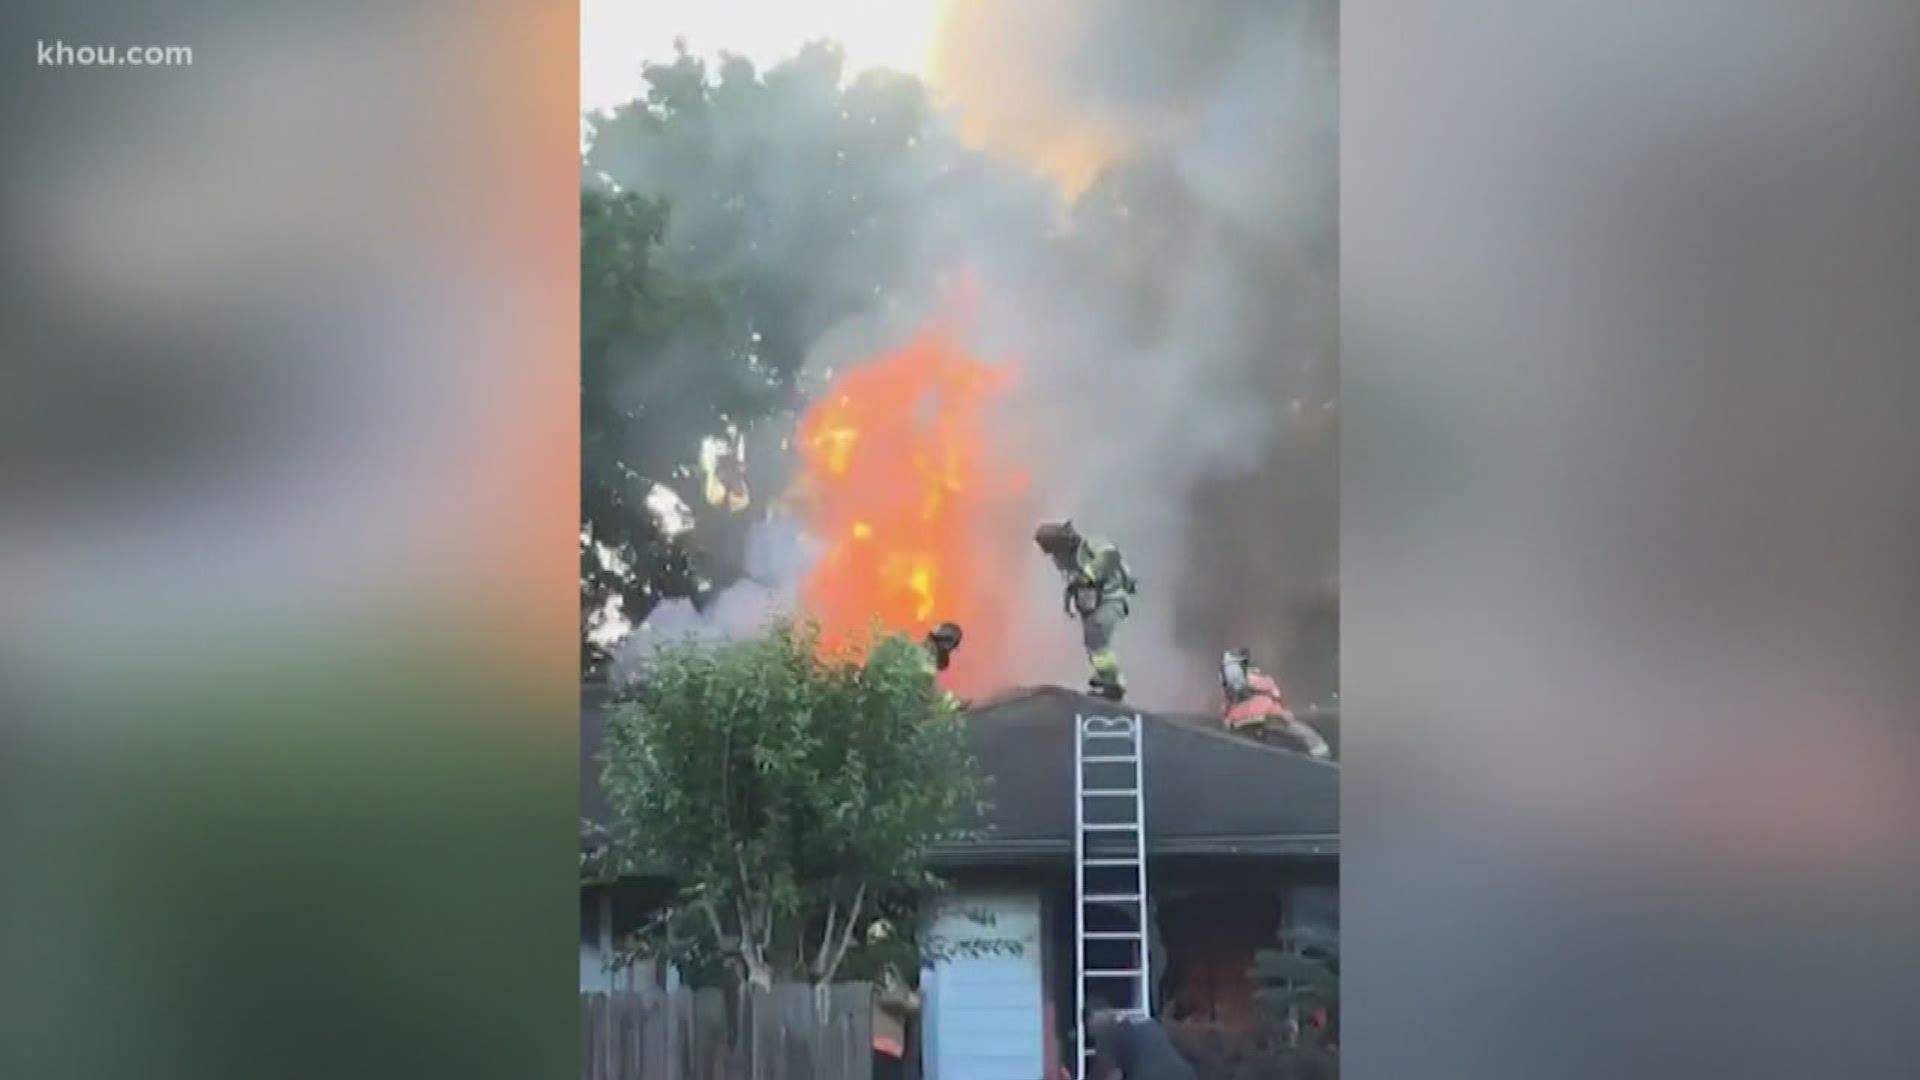 Neighbors are being credited with saving a man trapped in his burning home.